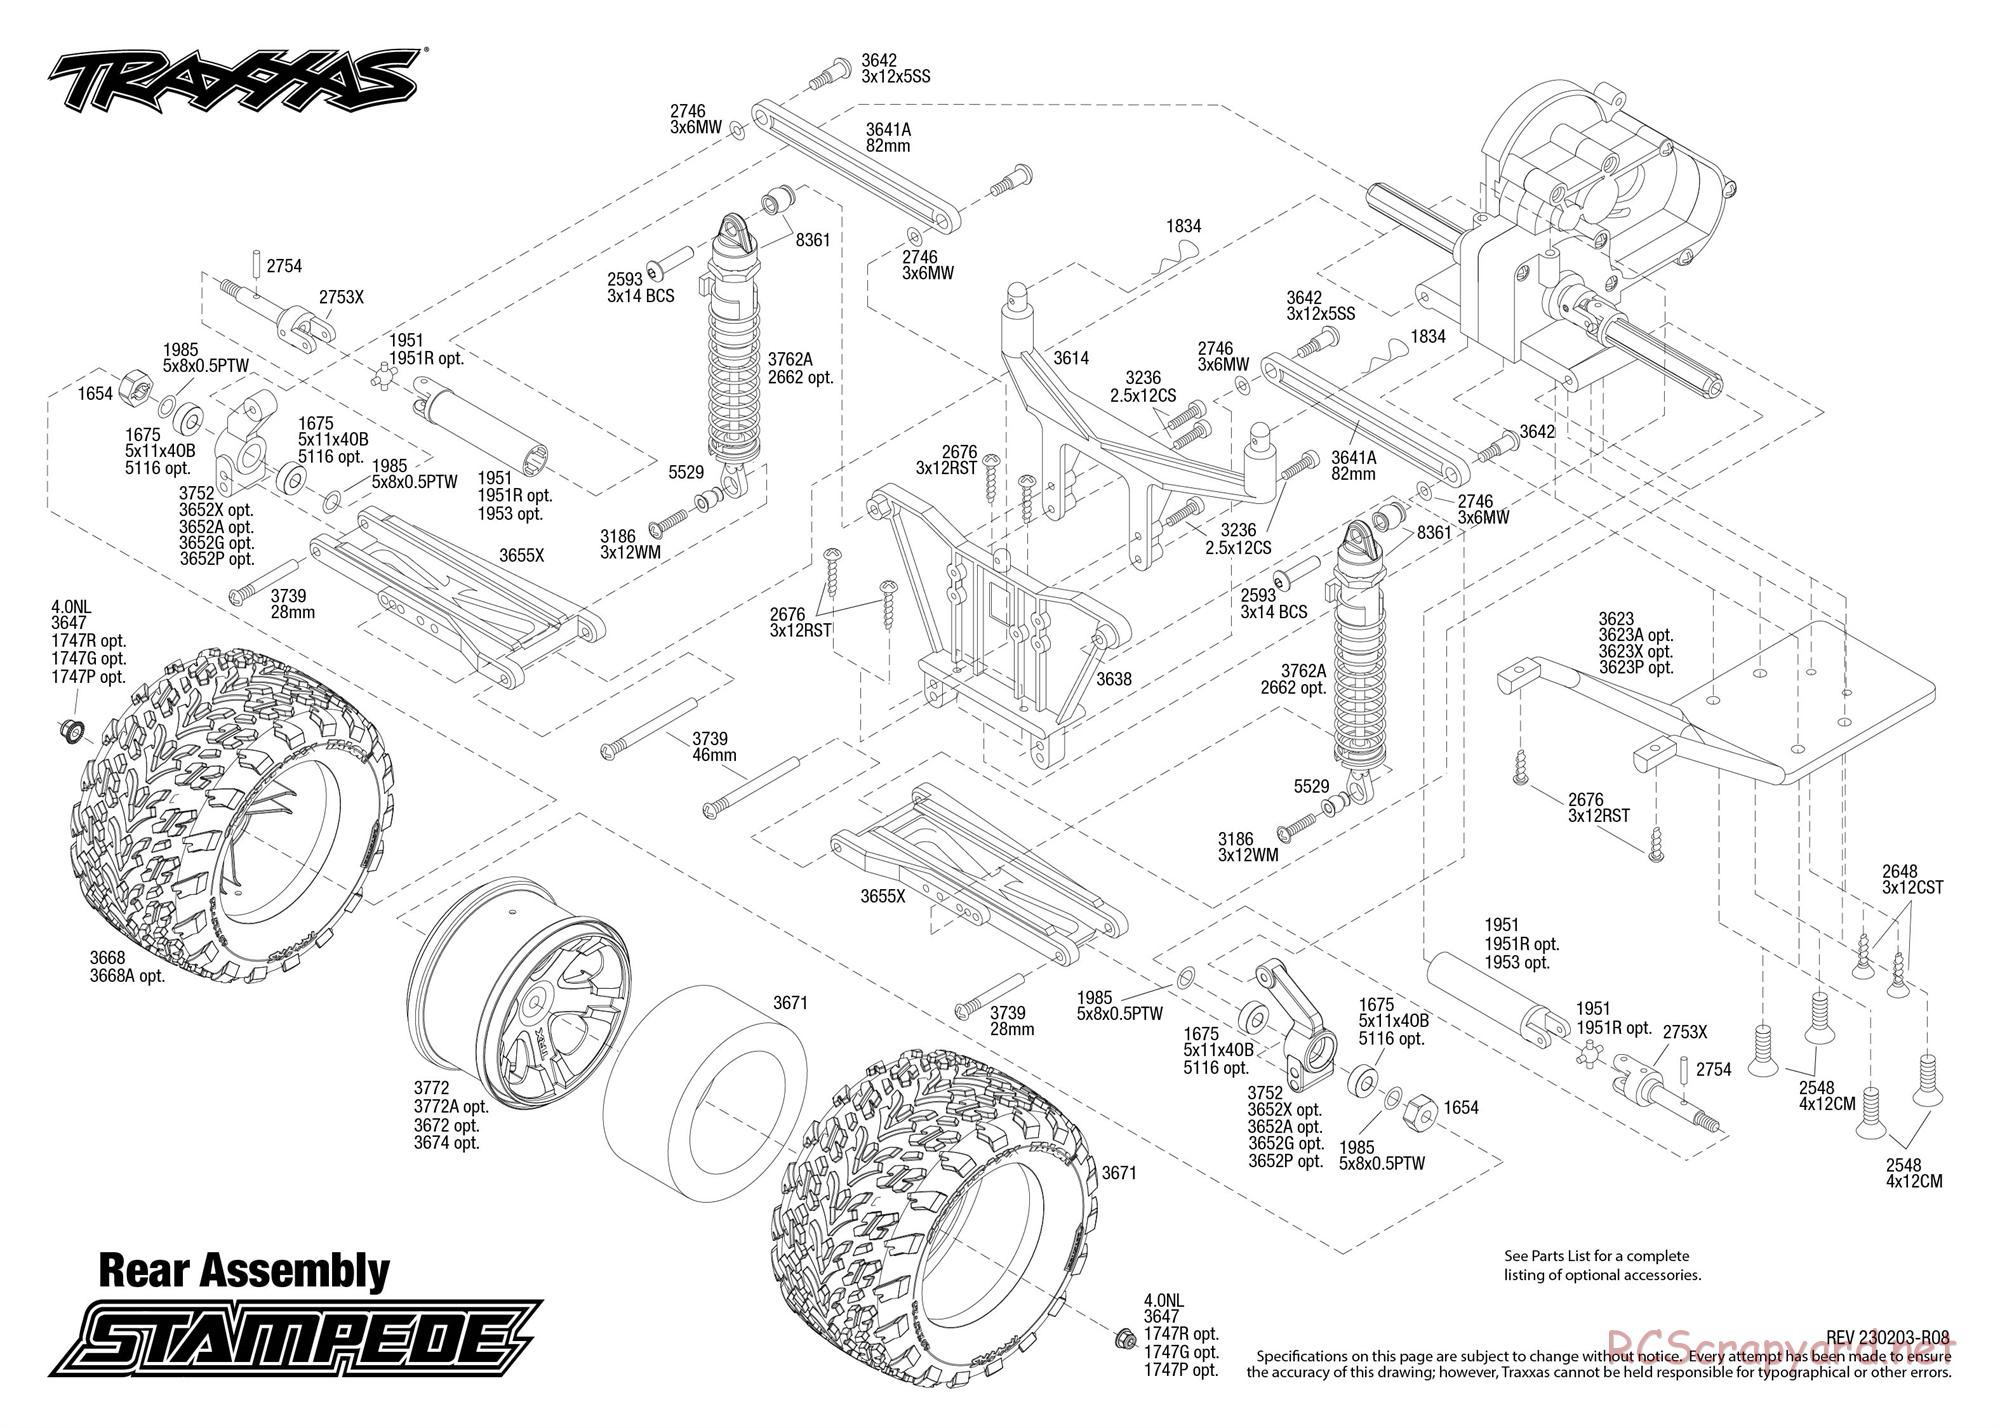 Traxxas - Stampede XL-5 (2015) - Exploded Views - Page 3